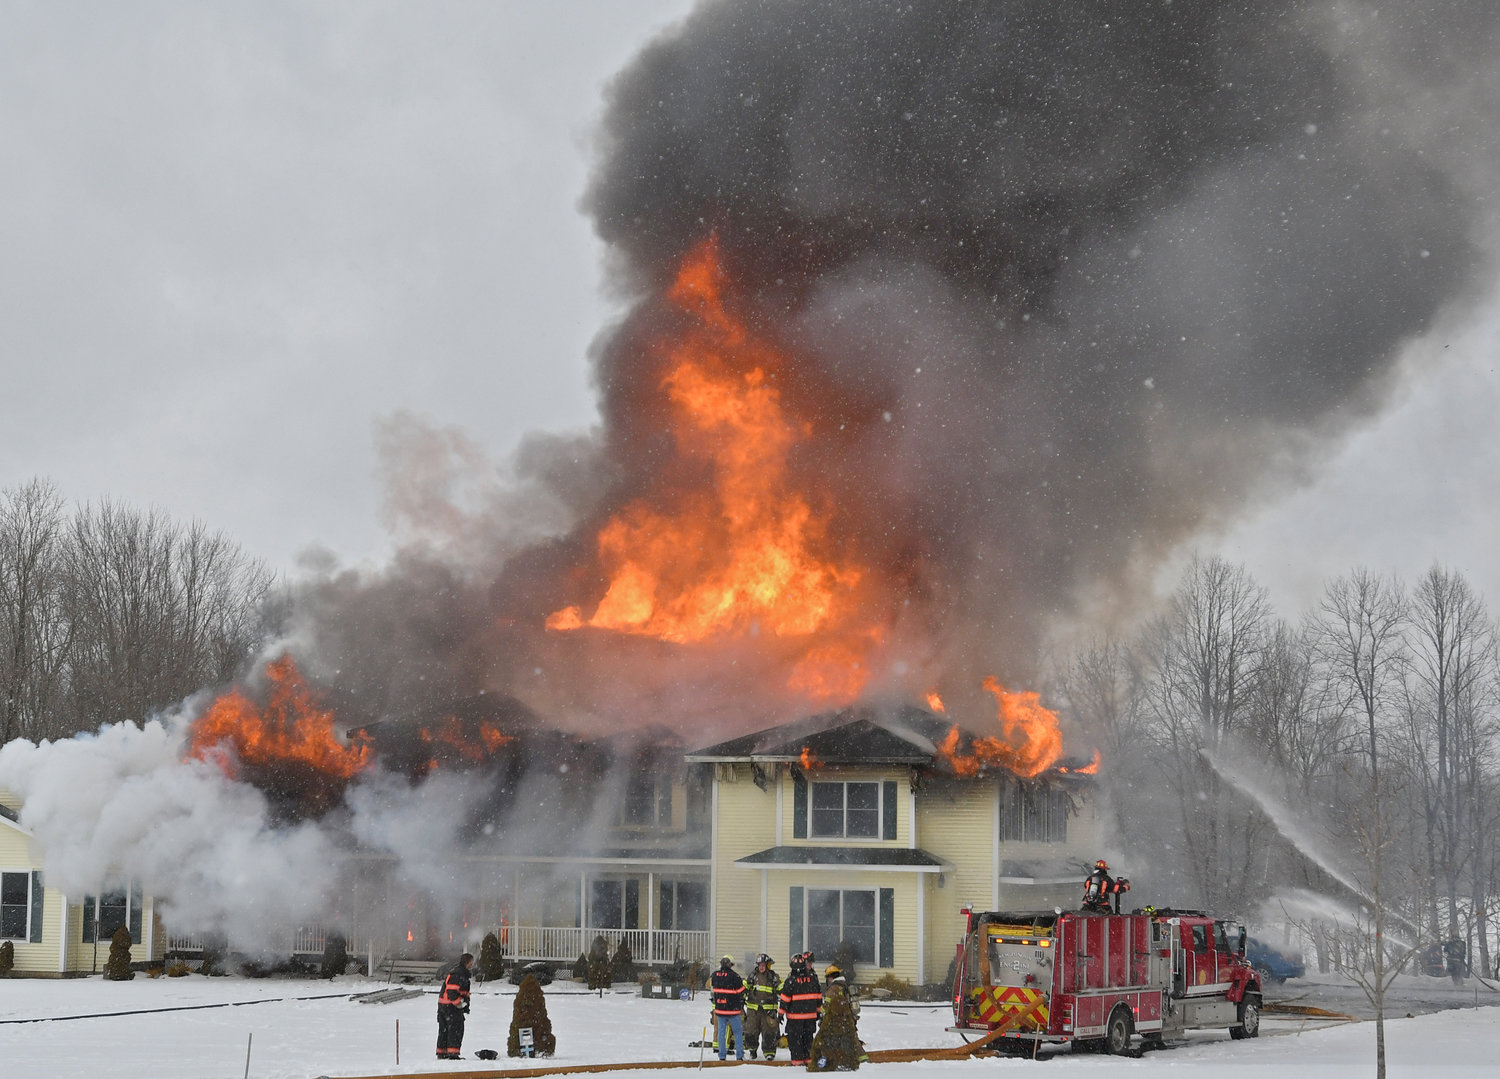 HEAVY FLAMES — The home at 4327 Wood Creek Road in Verona was engulfed in flames this morning as multiple volunteer fire departments were on the scene, with additional engines, tankers and manpower called in.